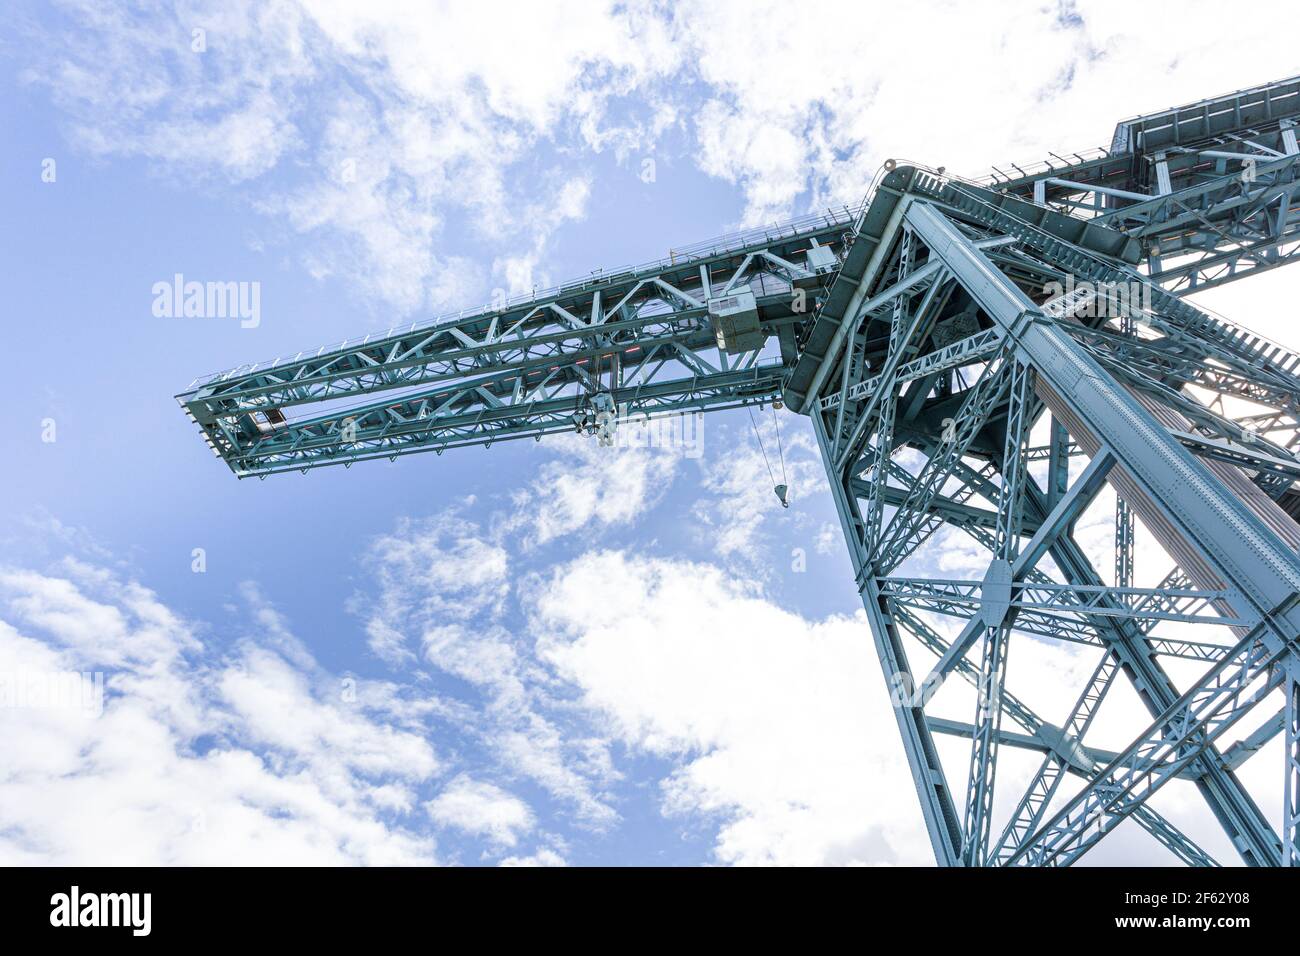 Titan Crane beside the River Clyde at Clydebank, Glasgow, Scotland UK - 150 foot high cantilever crane on the site of the former John Brown Shipyard. Stock Photo